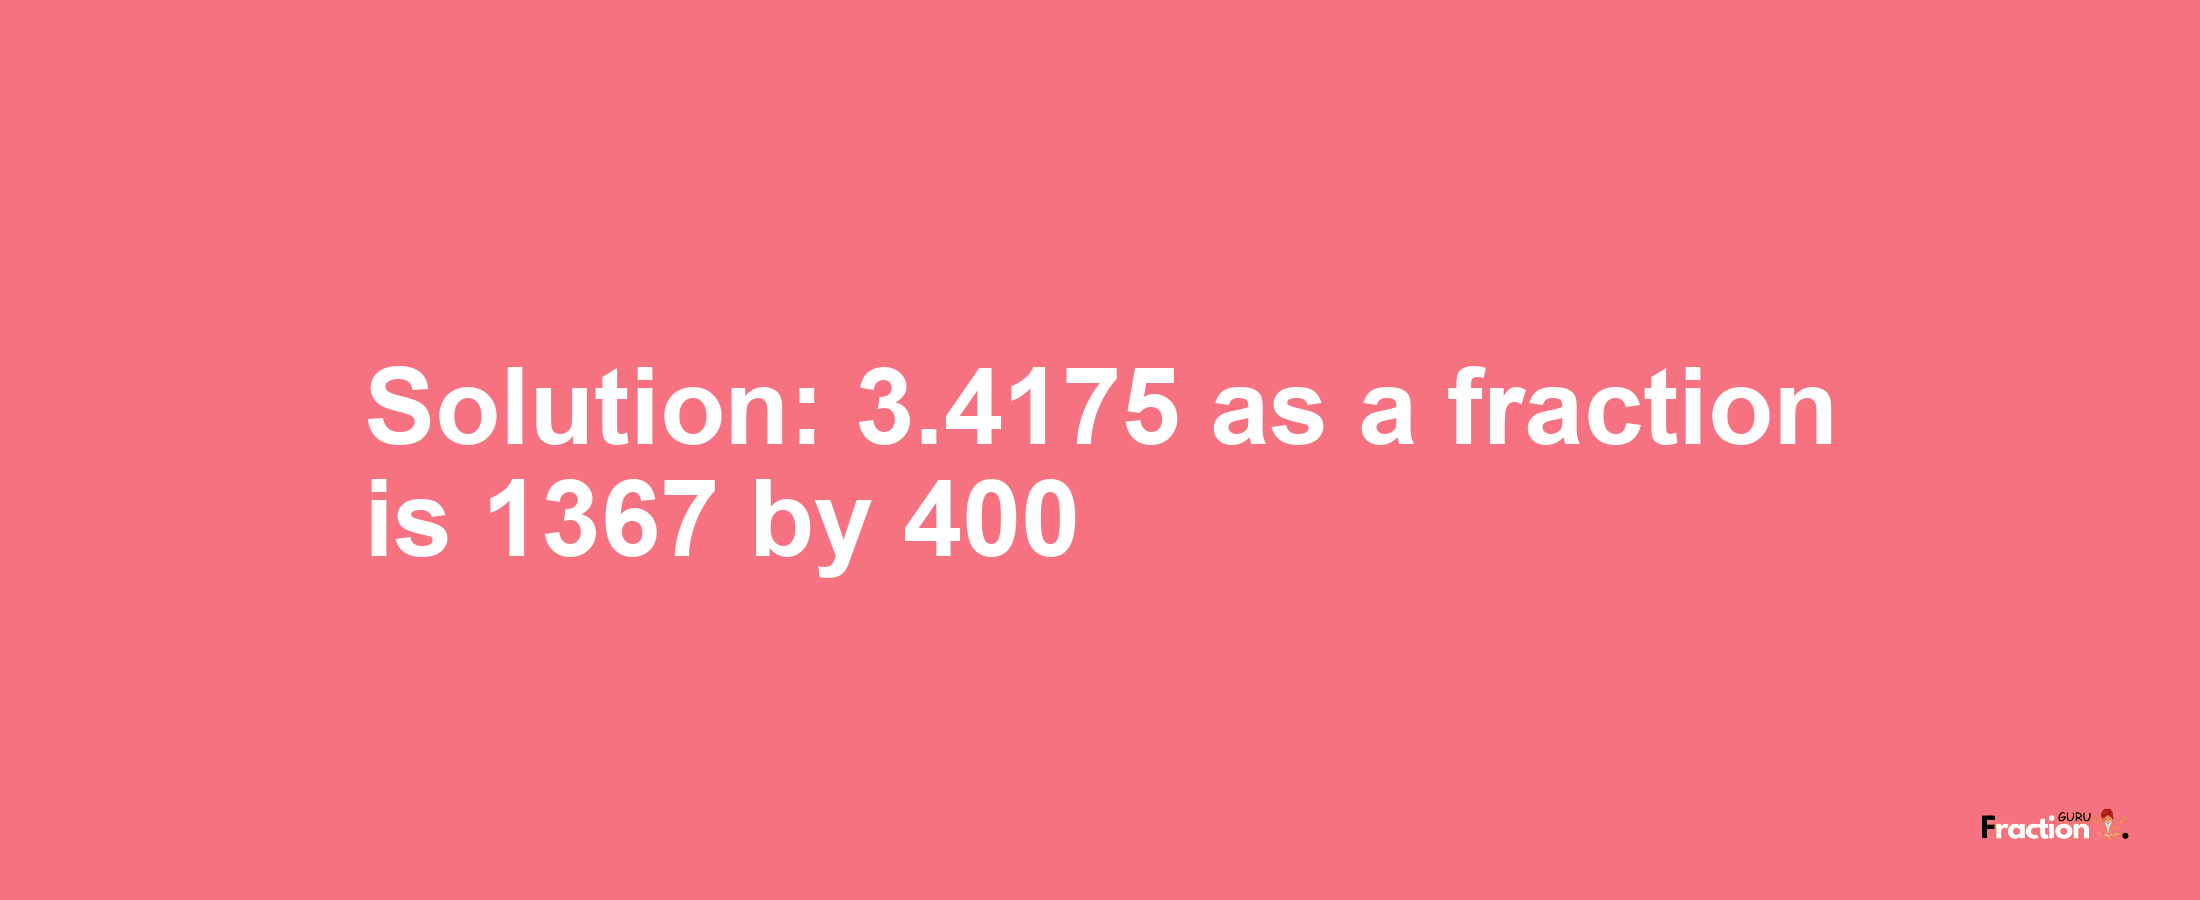 Solution:3.4175 as a fraction is 1367/400